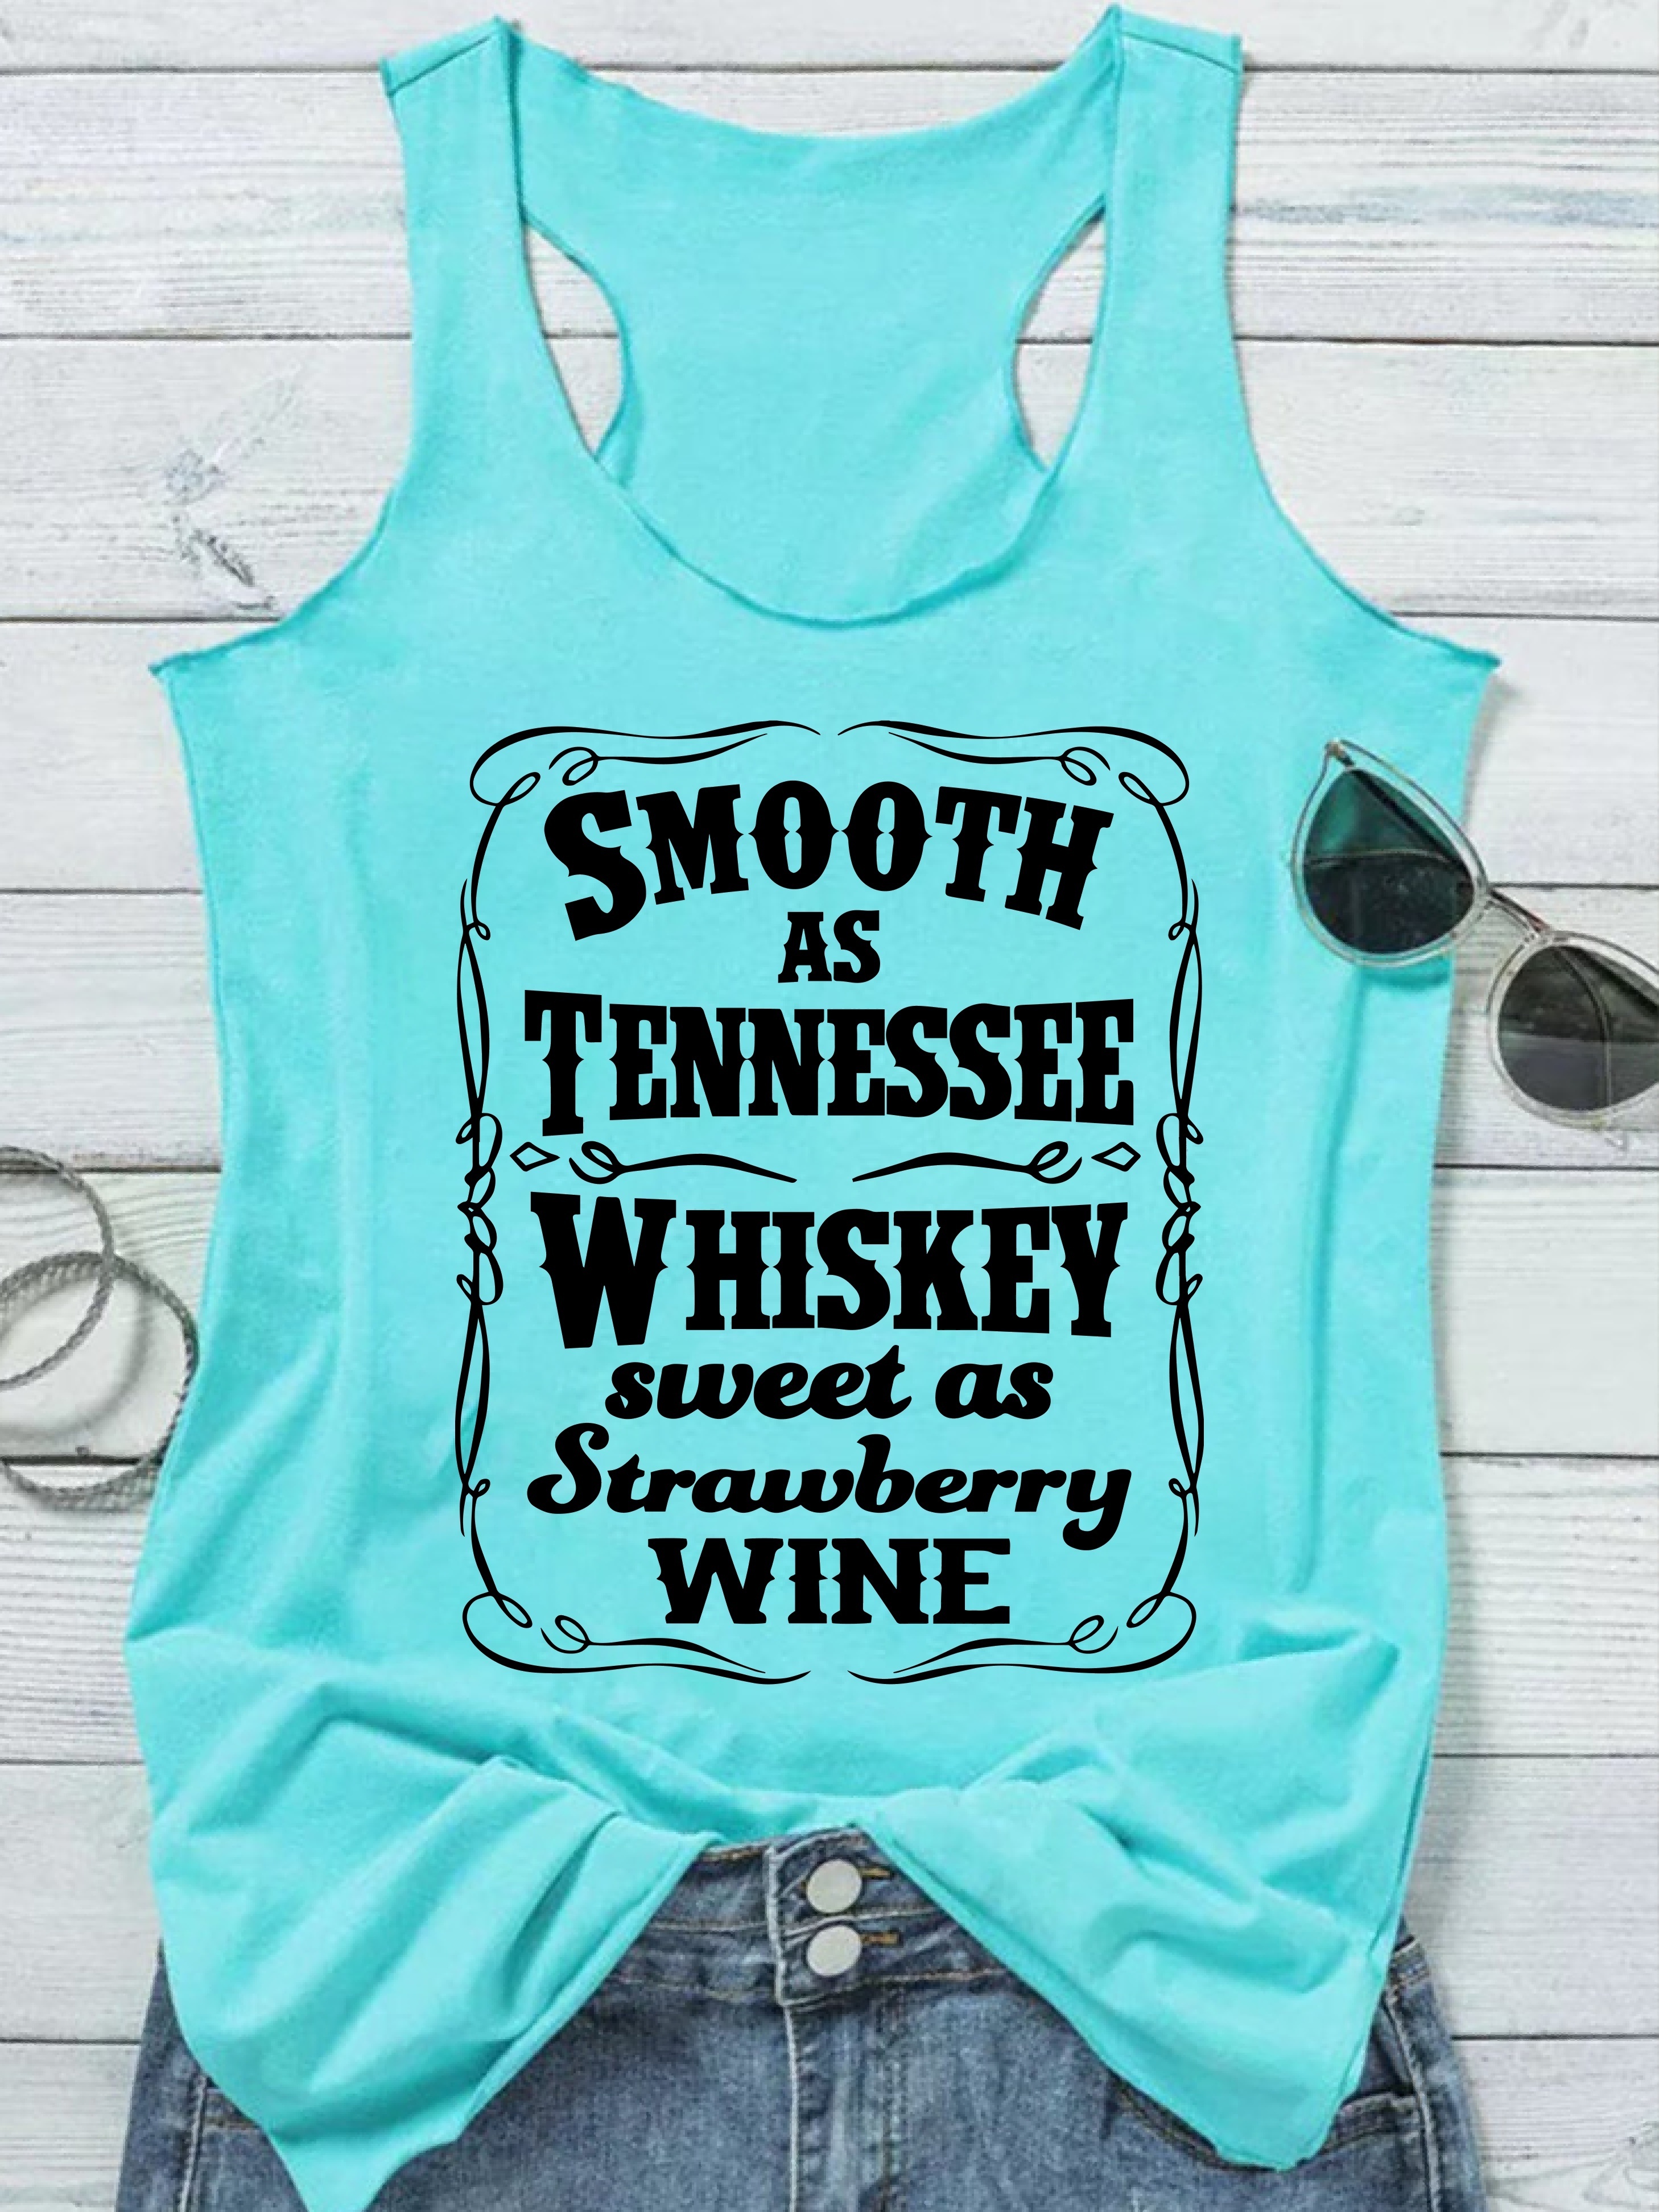 Smooth as Tennessee Whiskey Tank Top, Womens Tank Top, Drinking Tank Top,  Country Music Shirt, Country Girl Shirt, Customize, Size S-2X -  Canada